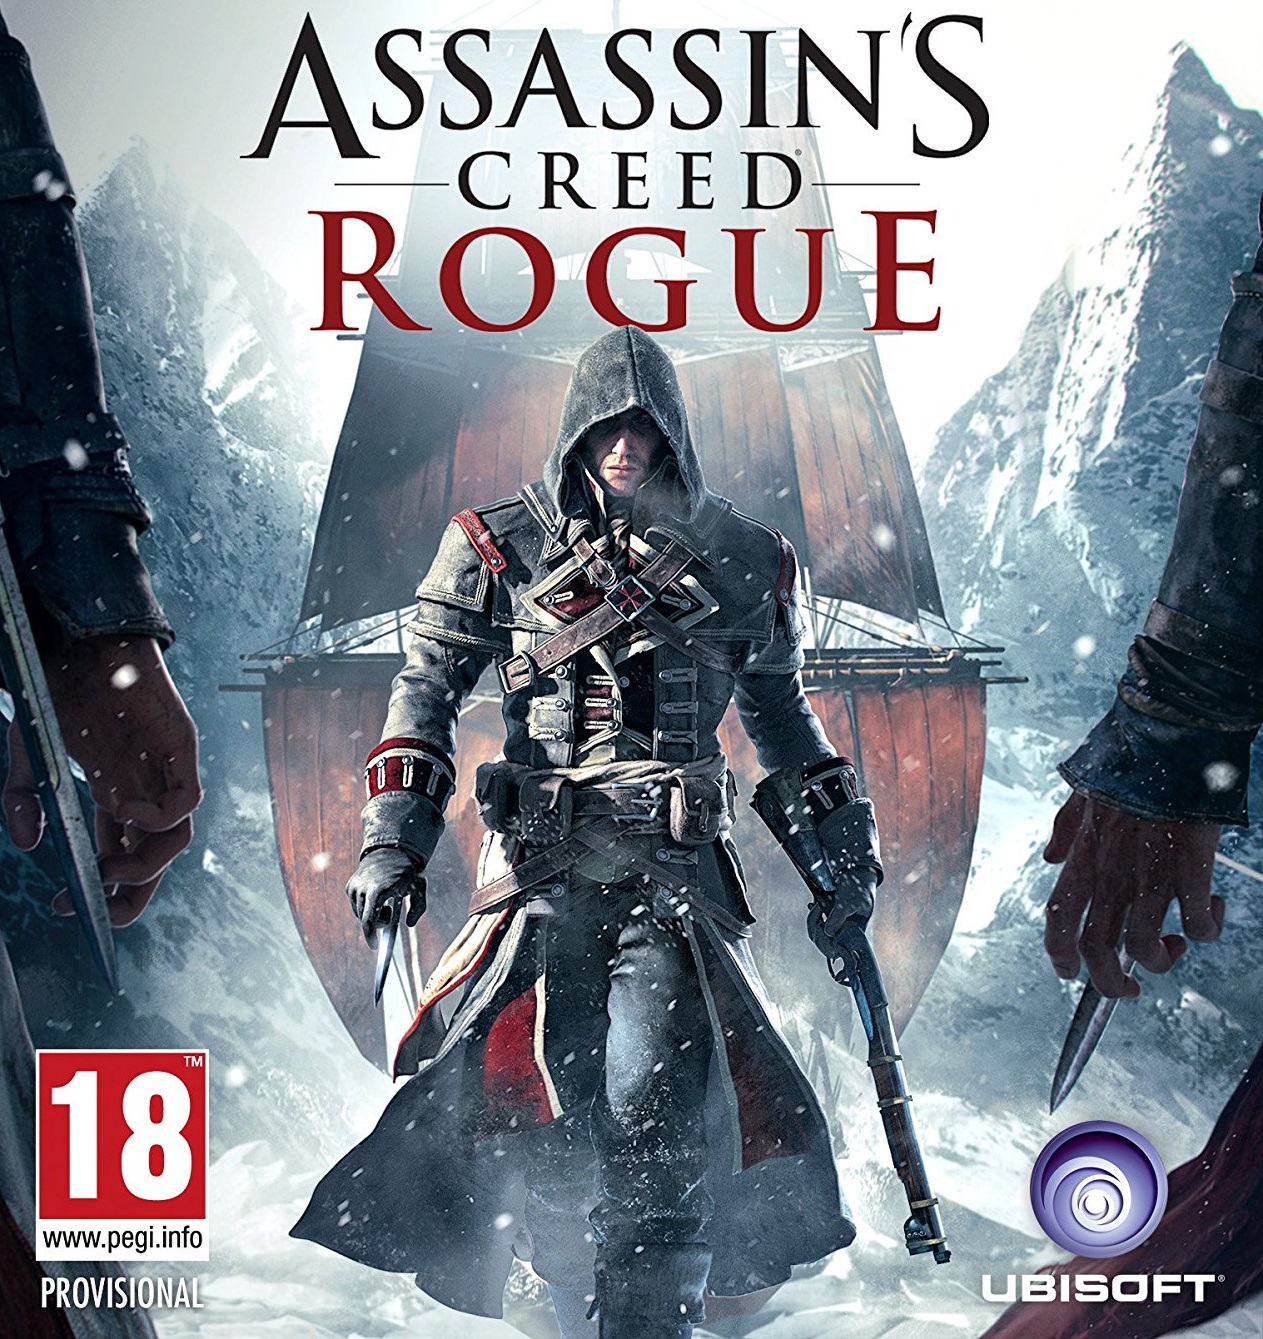 Gaming Couch Potato: Assassin’s Creed Rogue Remastered: Announcement ...